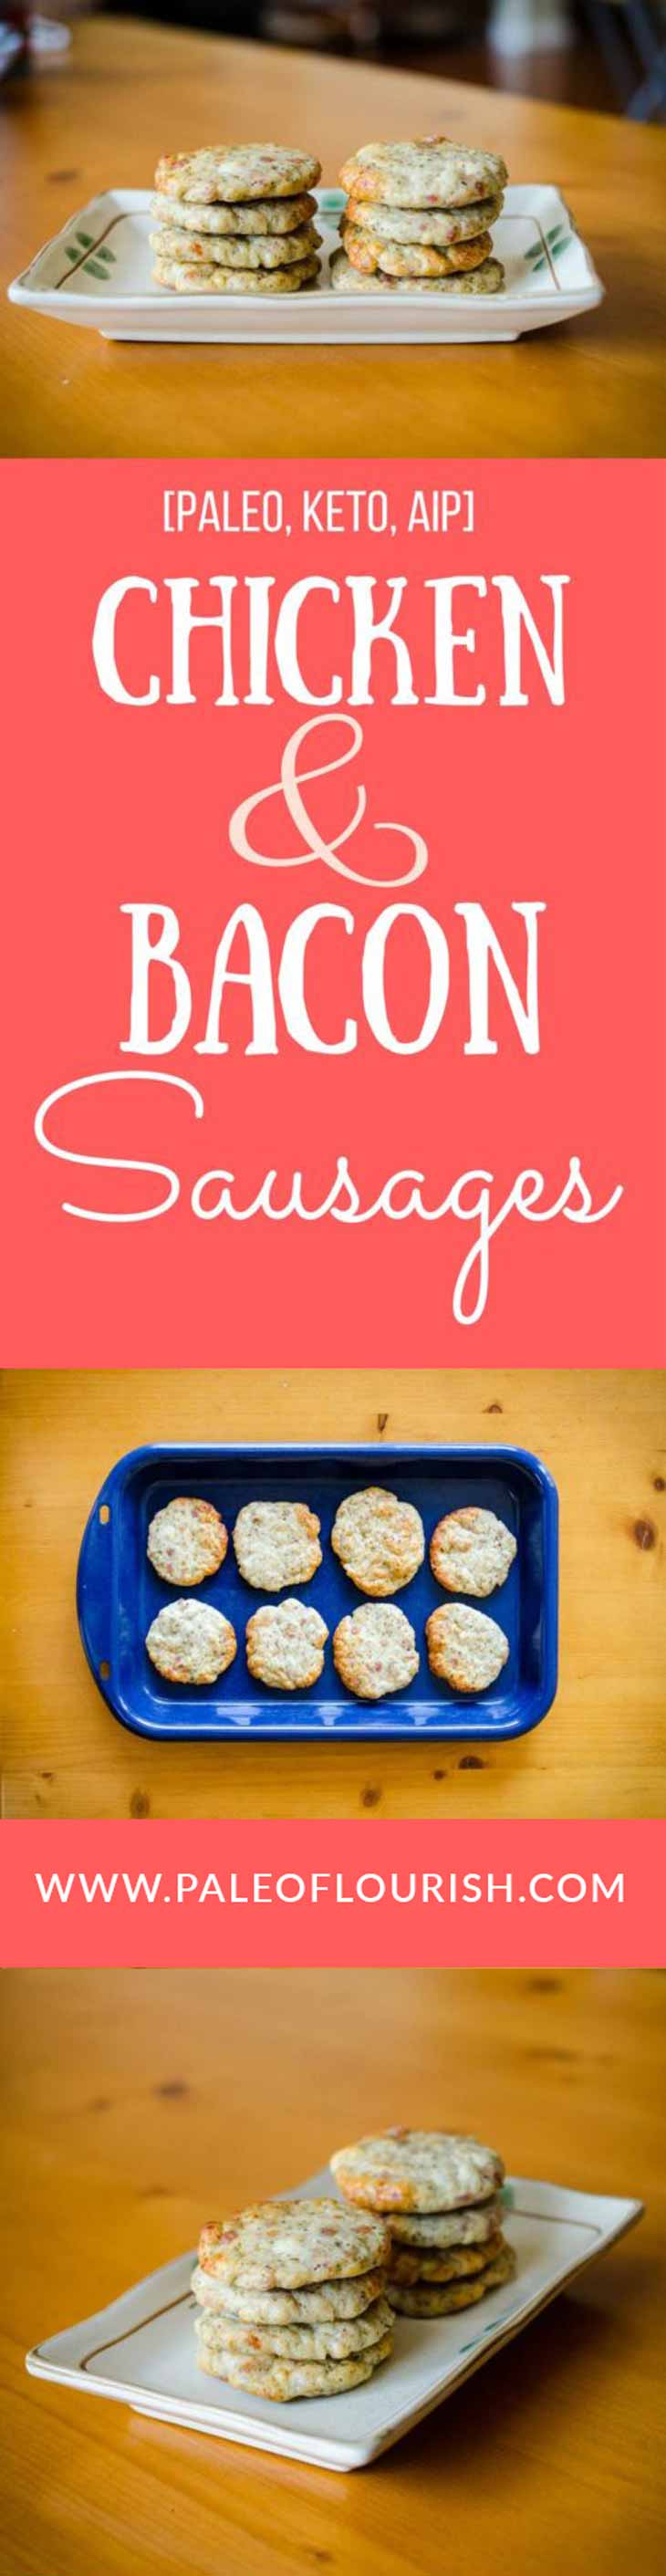 Chicken and Bacon Sausages Recipe [Paleo, Keto, AIP] #paleo #keto #aip #recipes -  https://paleoflourish.com/paleo-chicken-bacon-sausages-recipe